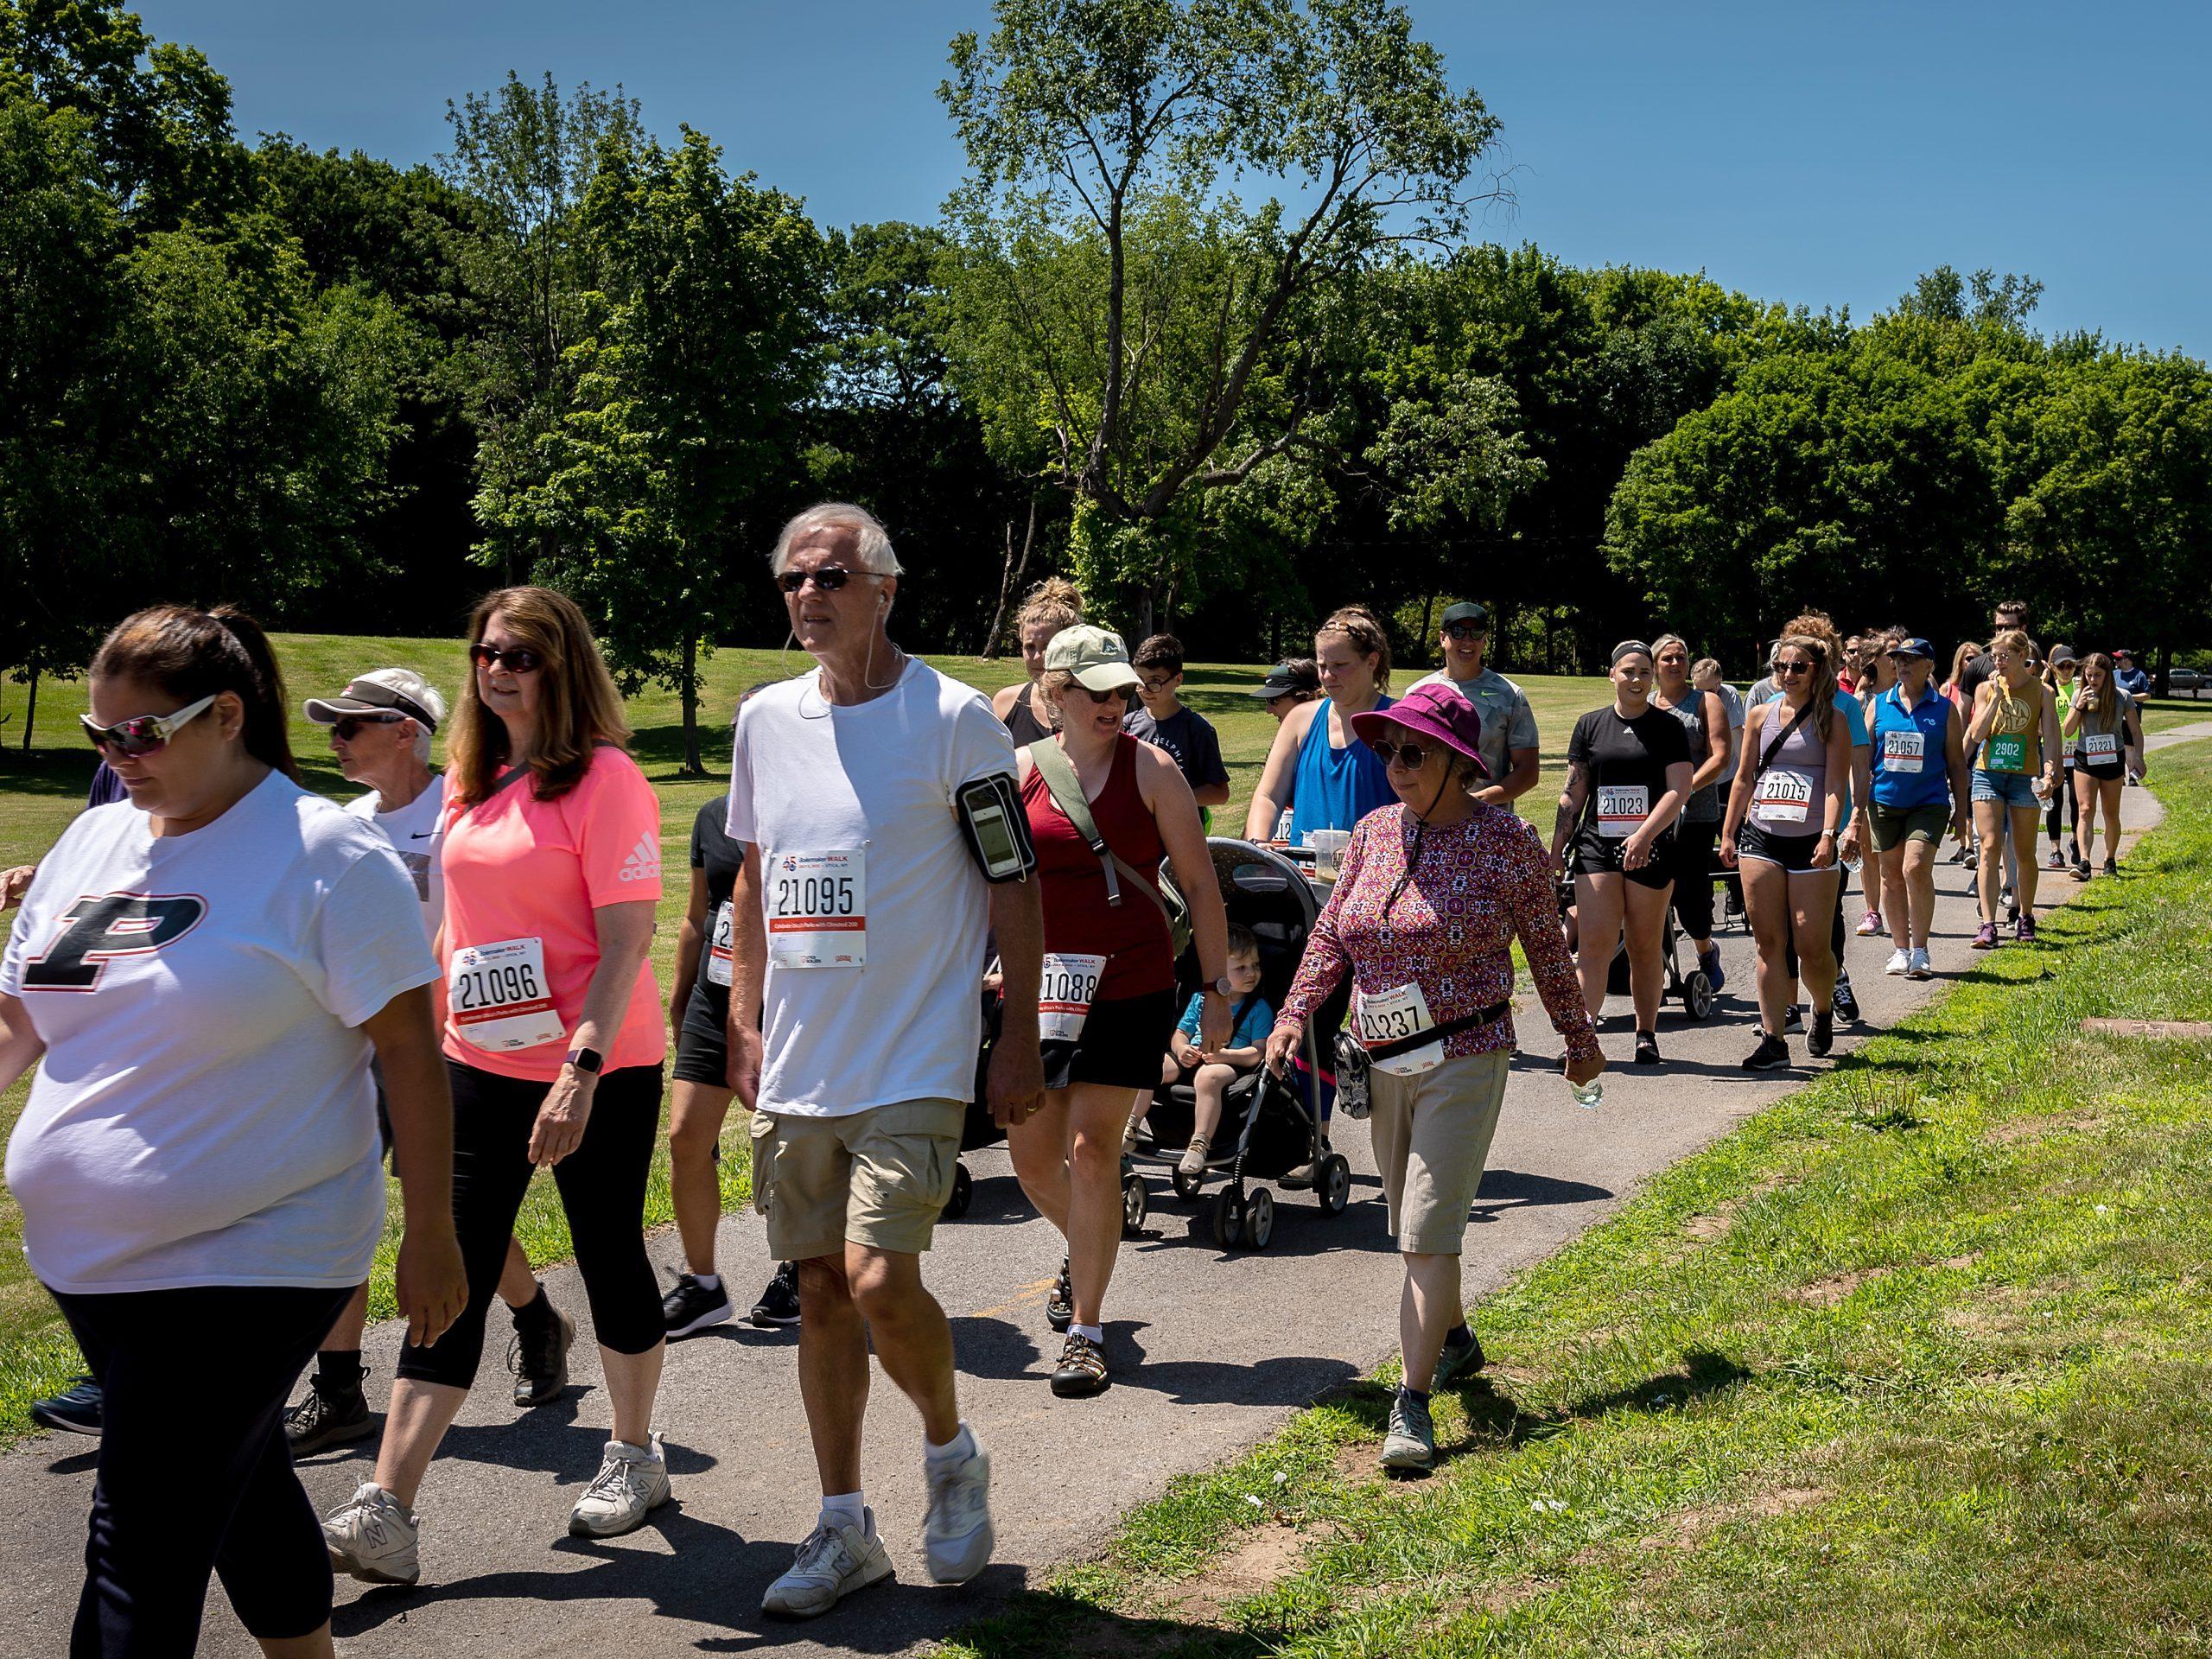 Participants in the Boilermaker Walk on the course.